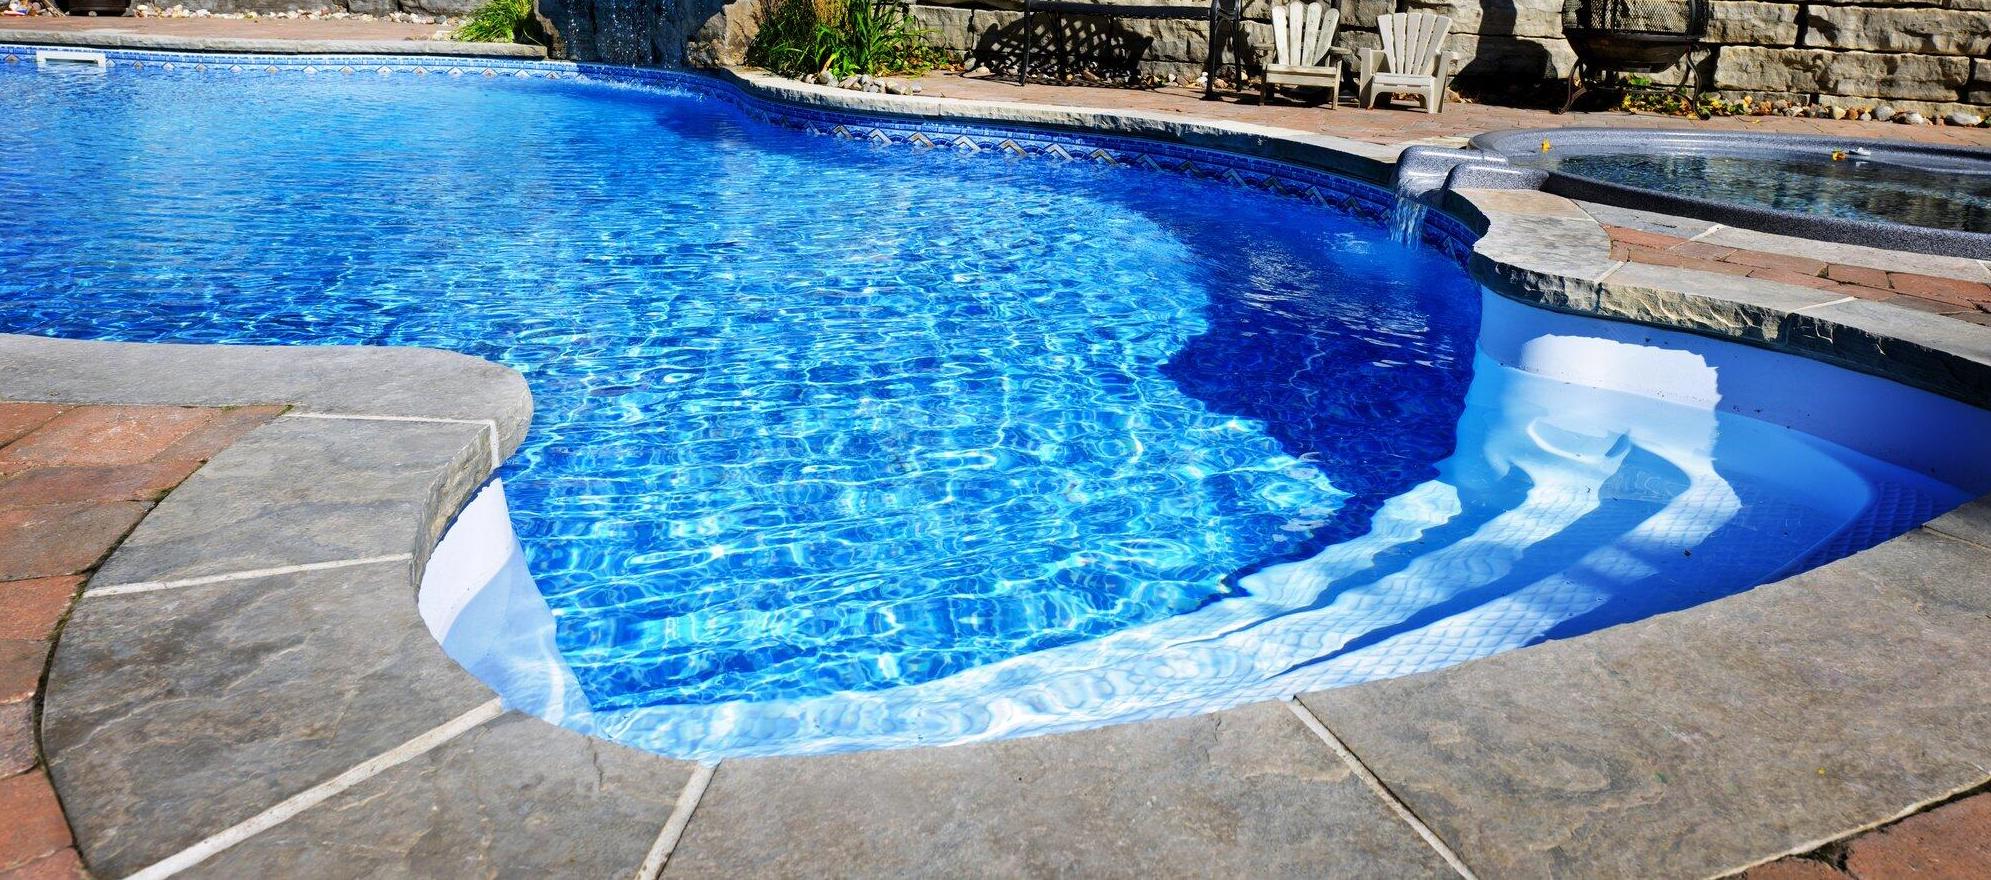 Turnkey Pool Design: Choose From One of Our Stock Options